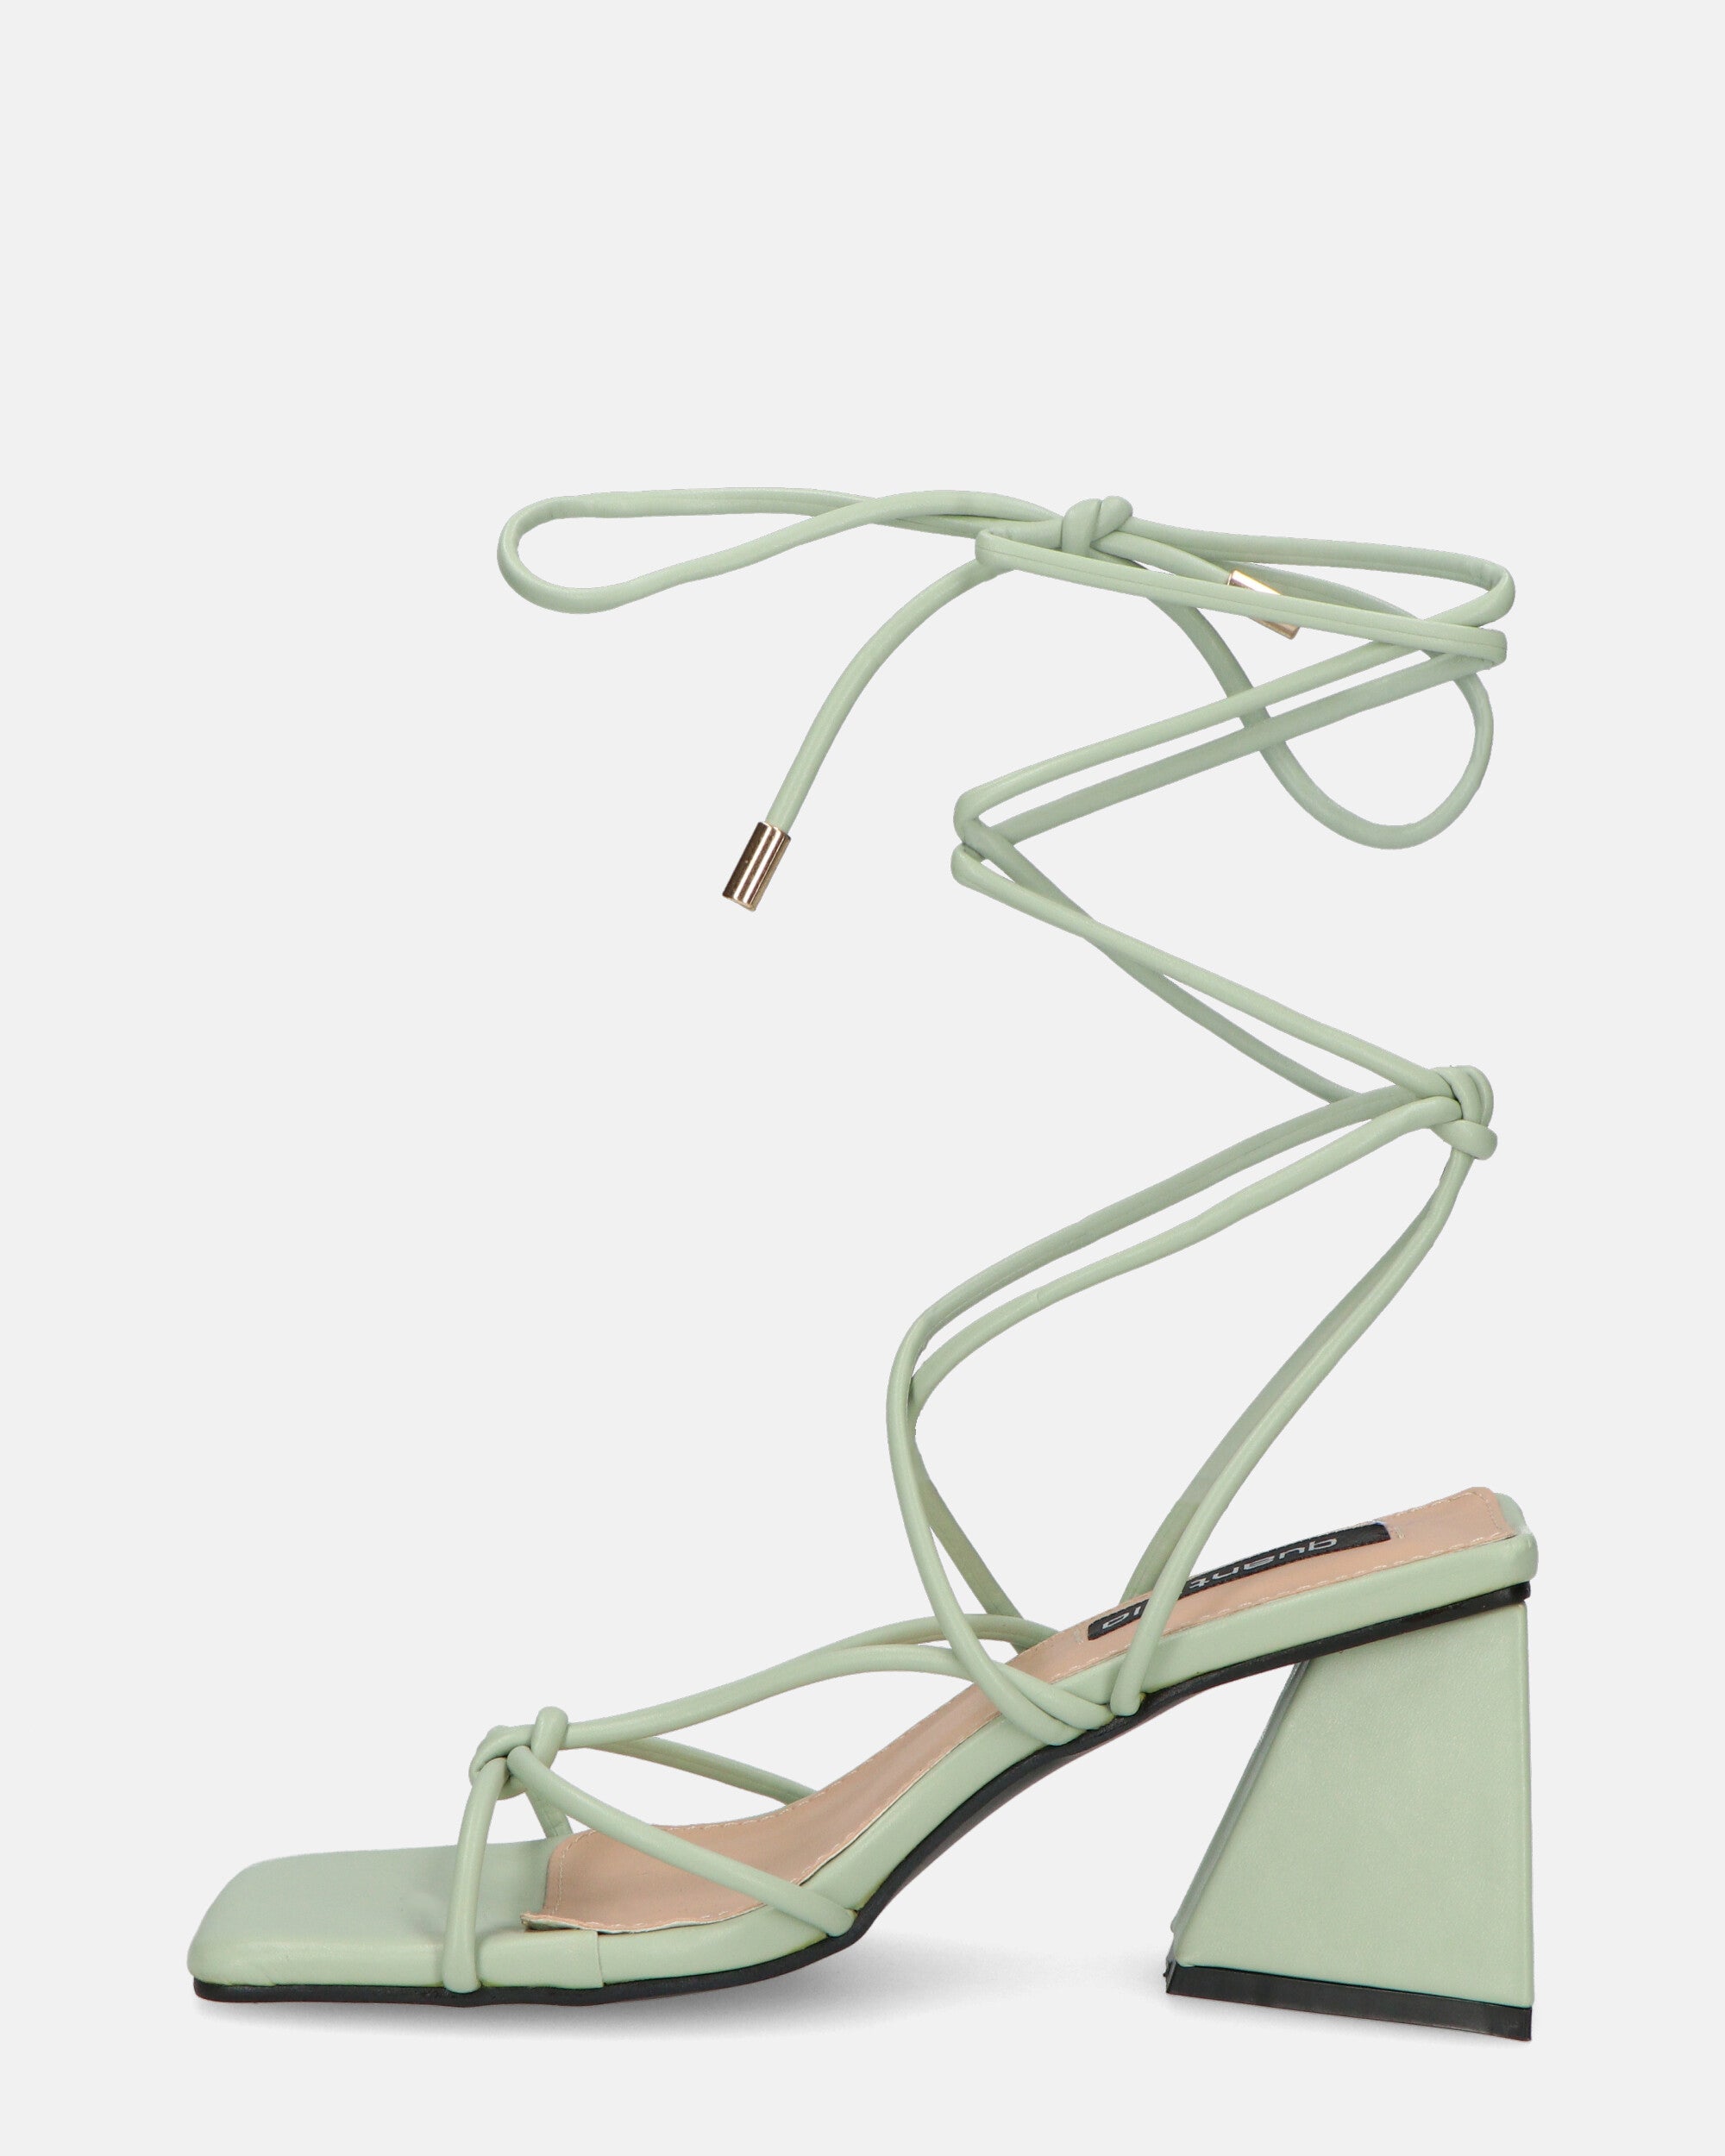 MELISA - sandals with laces in green PU